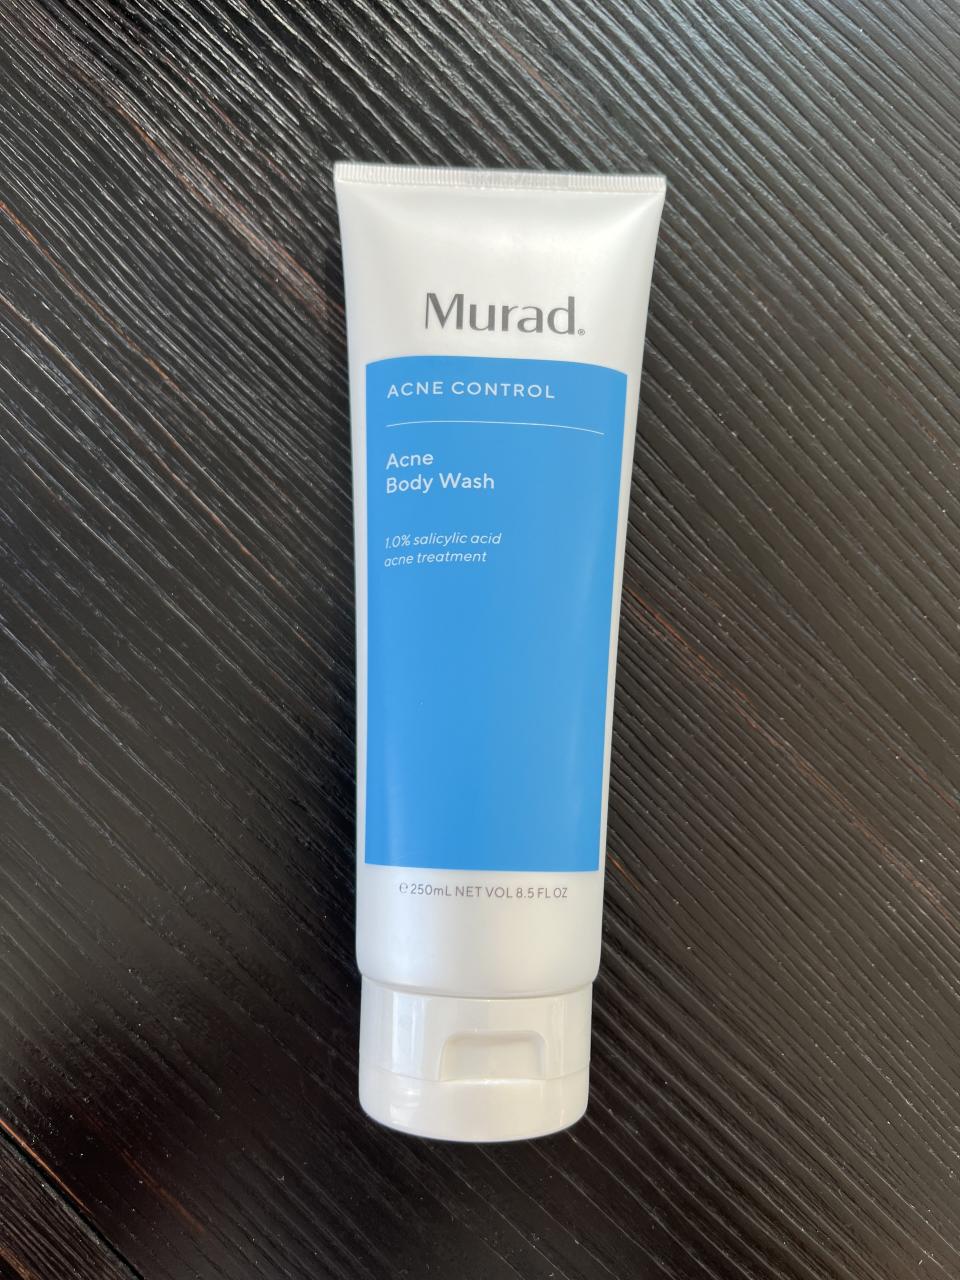 a bottle of the murad acne control acne body wash resting on the floor